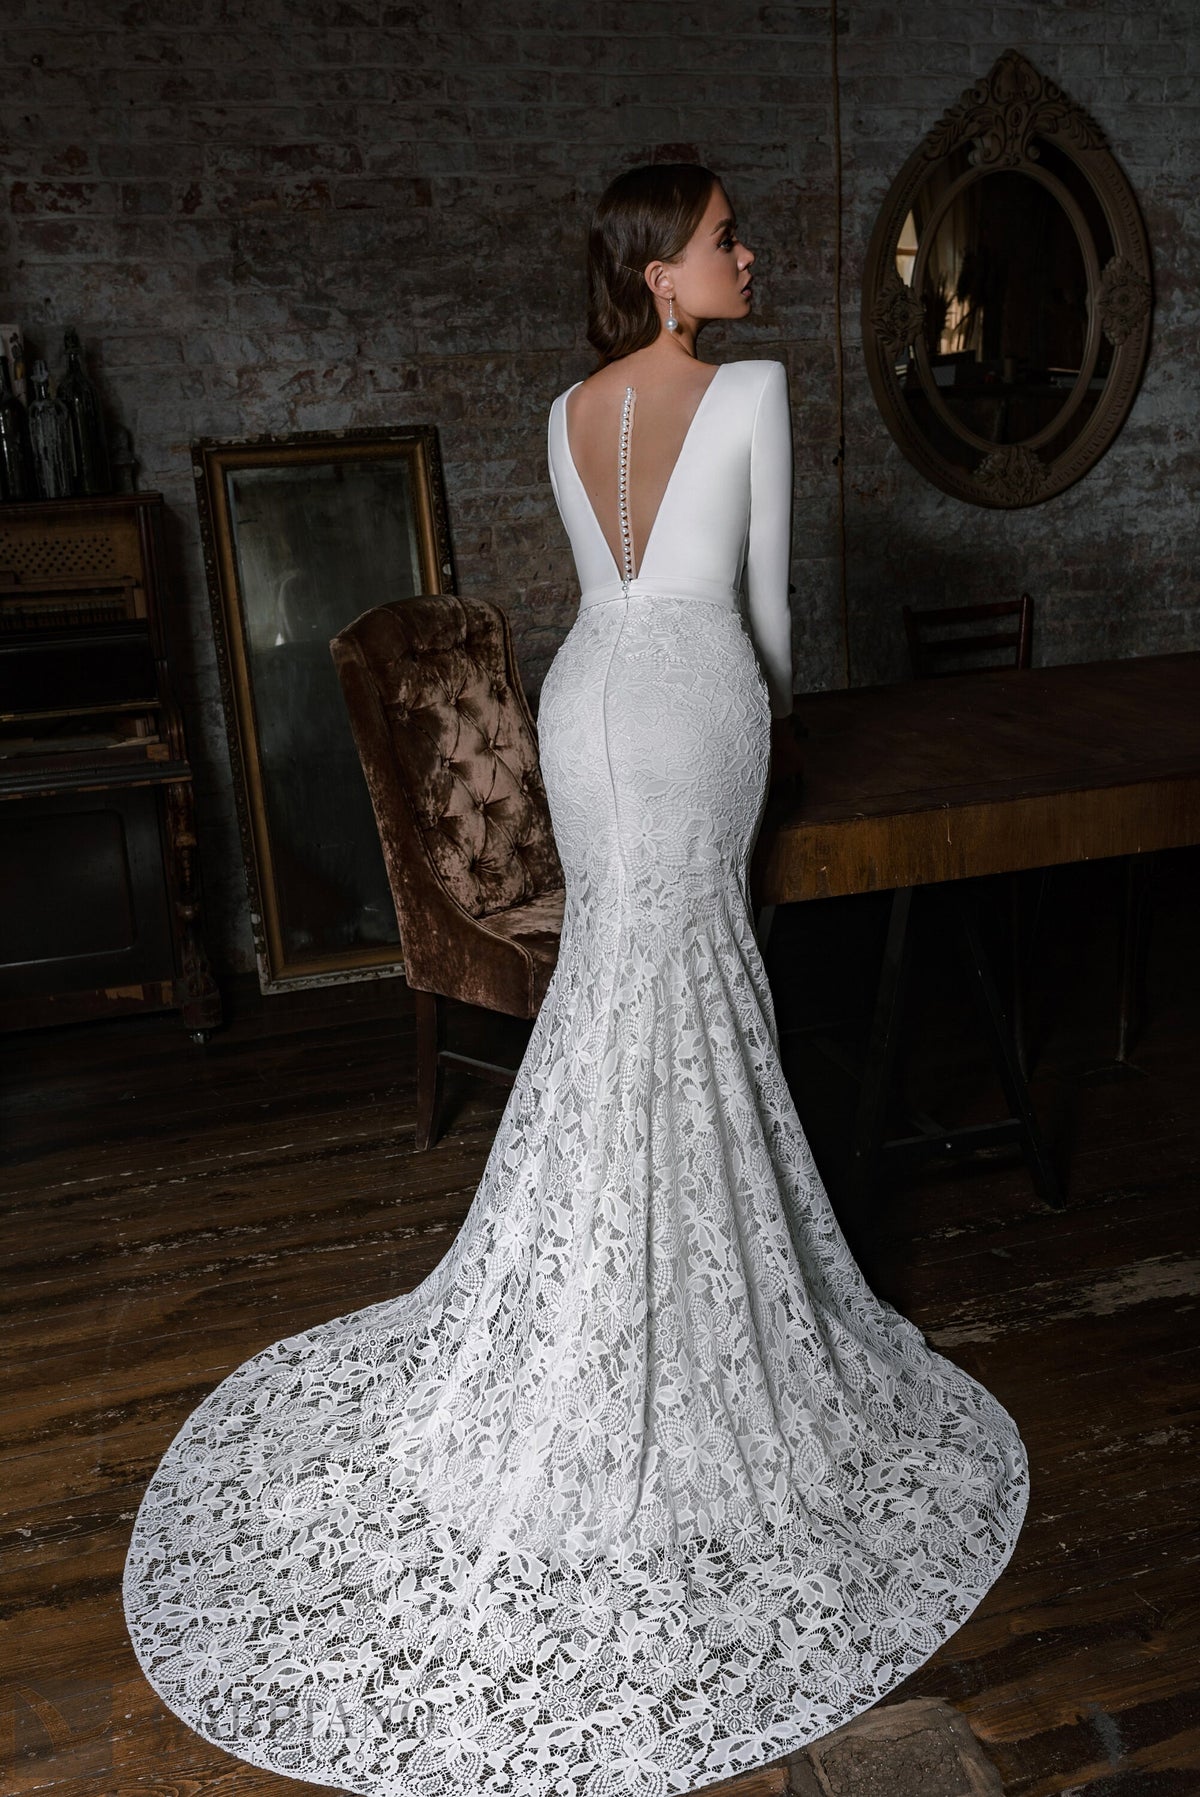 Long Sleeve Crepe Fitted Sexy Deep V Neckline Mermaid Fit and Flare Wedding Dress Bridal Gown Lace Skirt with Train and Illusion Open Back